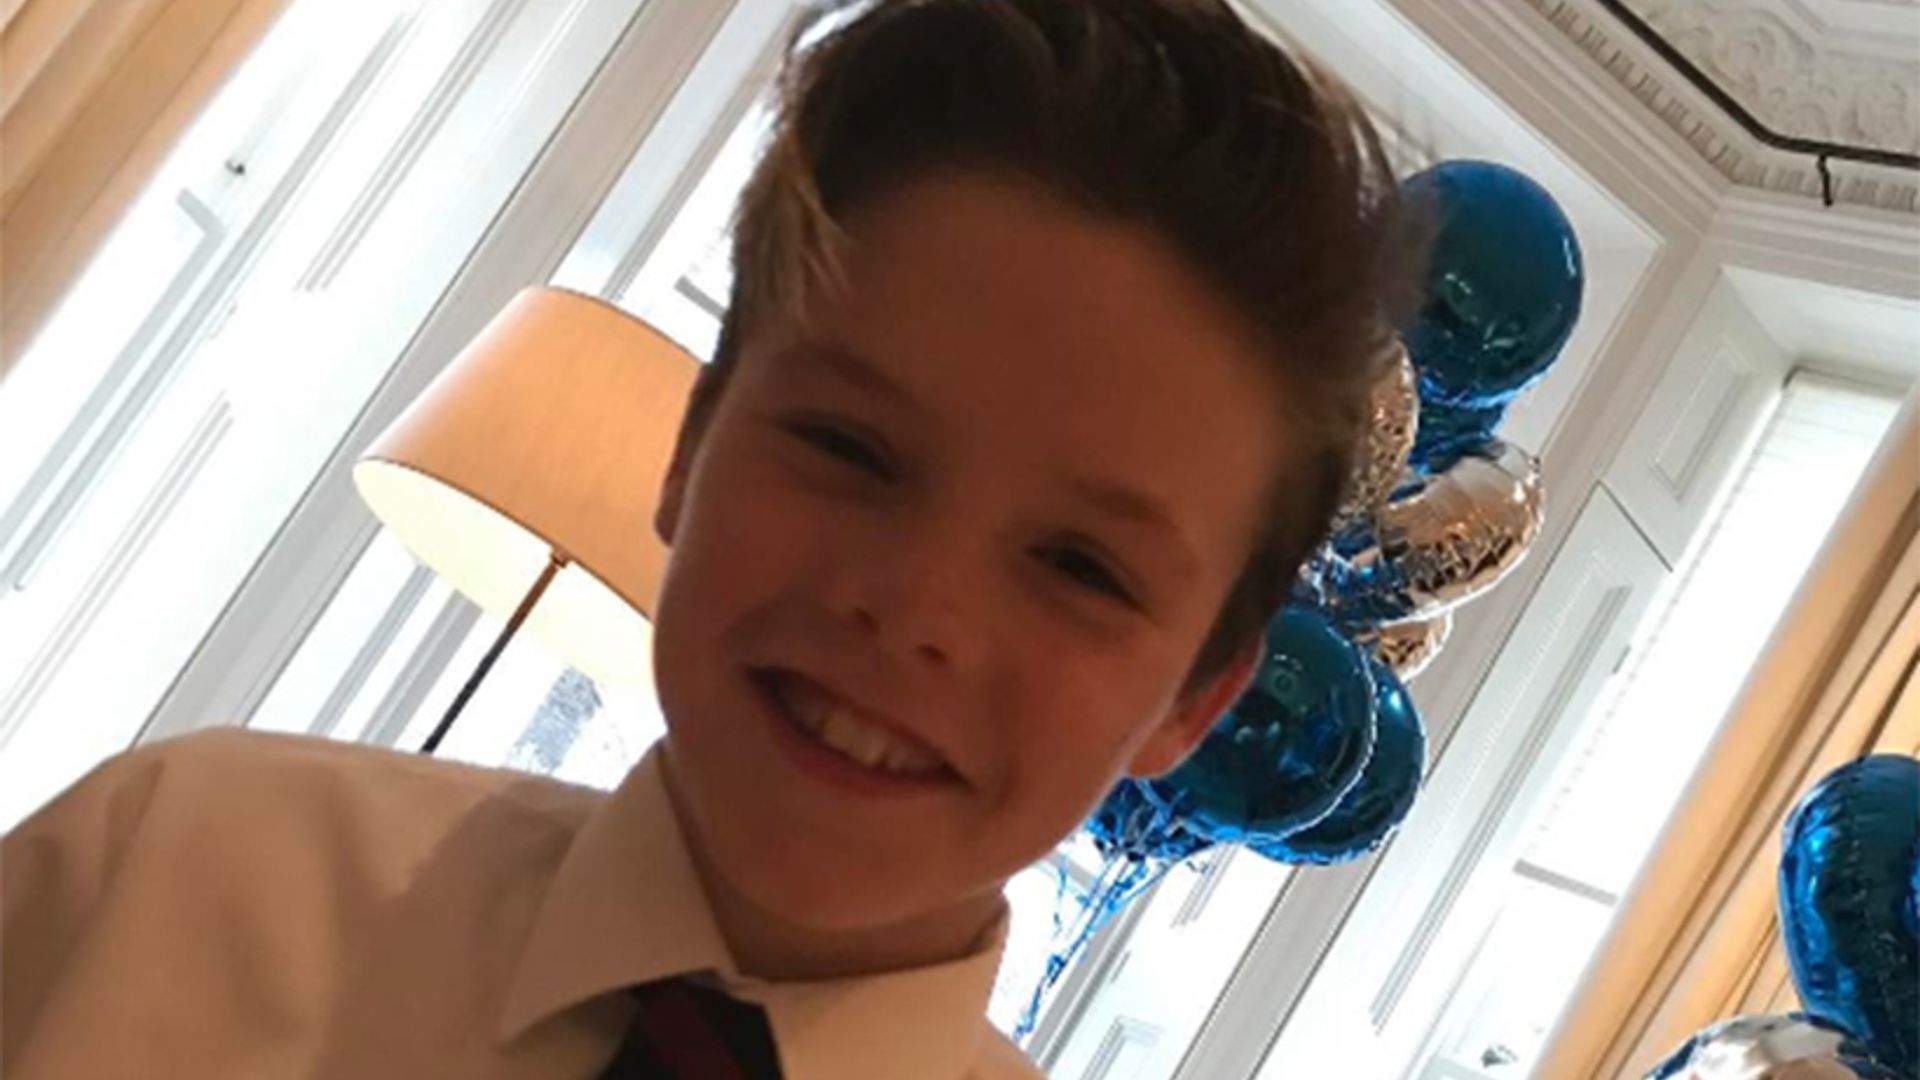 David Beckham shares sweet birthday message for Cruz: 'The cheekiest member of our family'